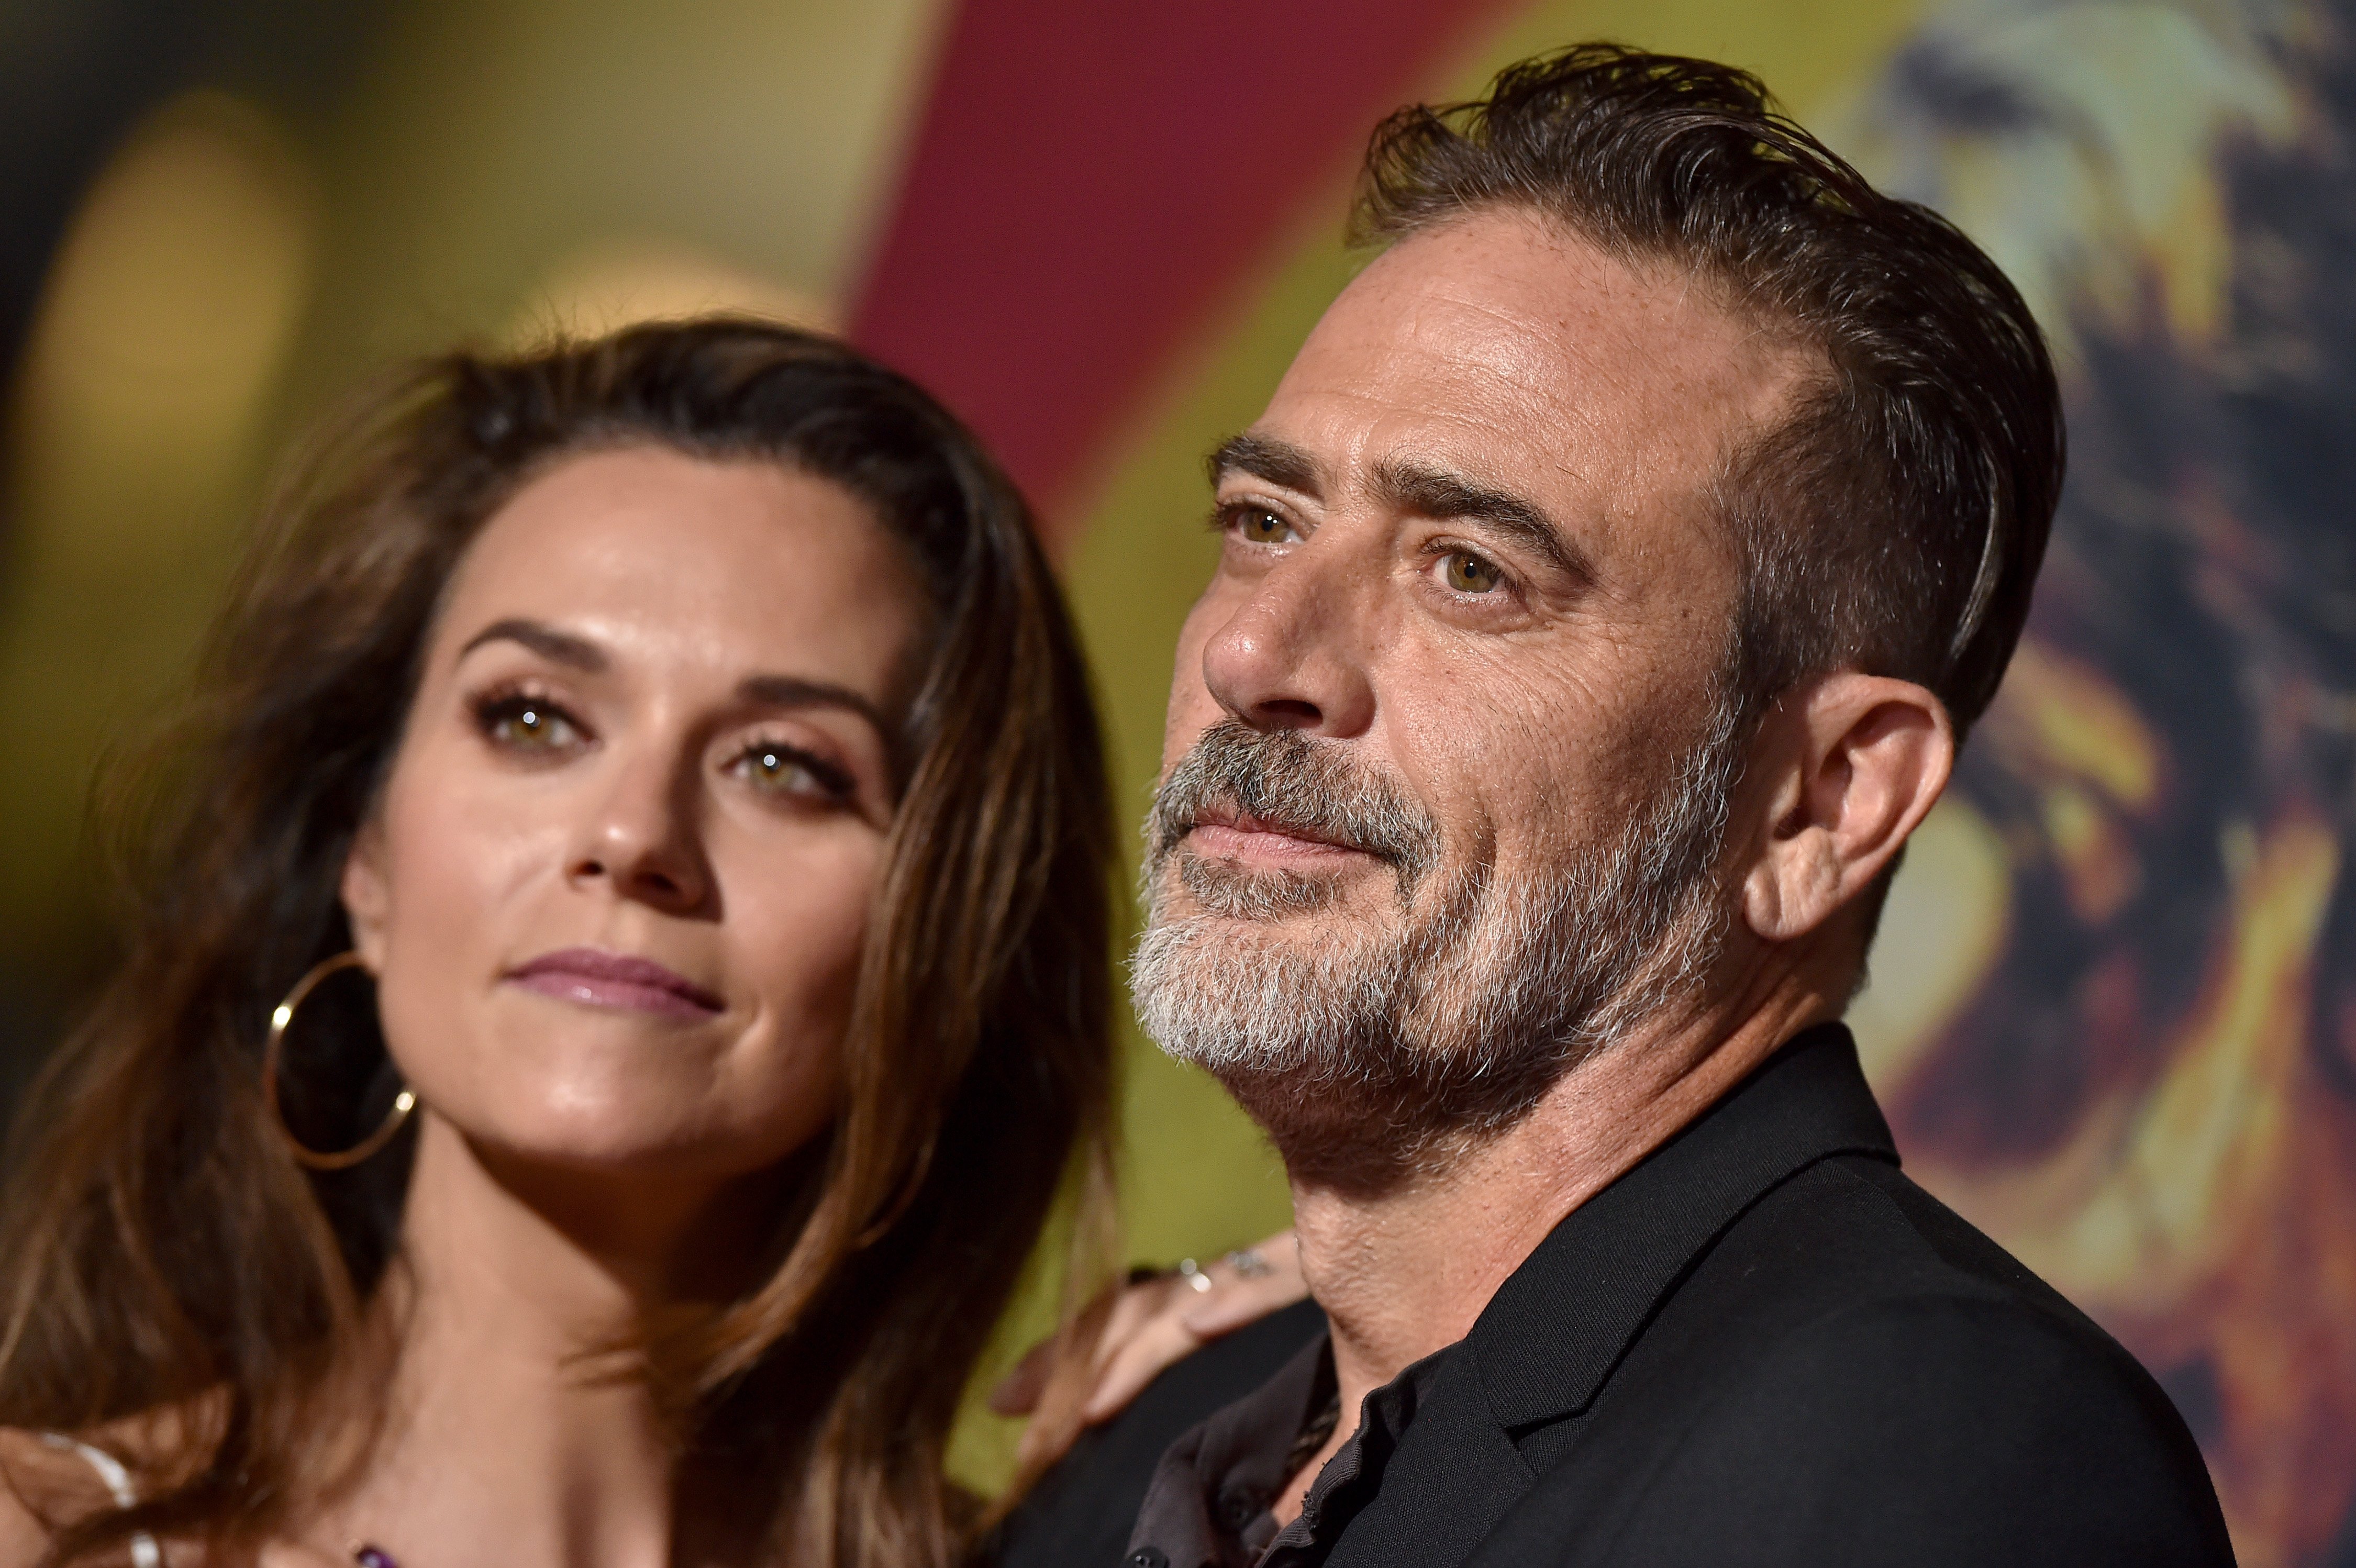 Hilarie Burton and Jeffrey Dean Morgan at the Special Screening of AMC's "The Walking Dead" Season 10 at Chinese 6 Theater in Hollywood, California | Photo: Axelle/Bauer-Griffin/FilmMagic via Getty Images